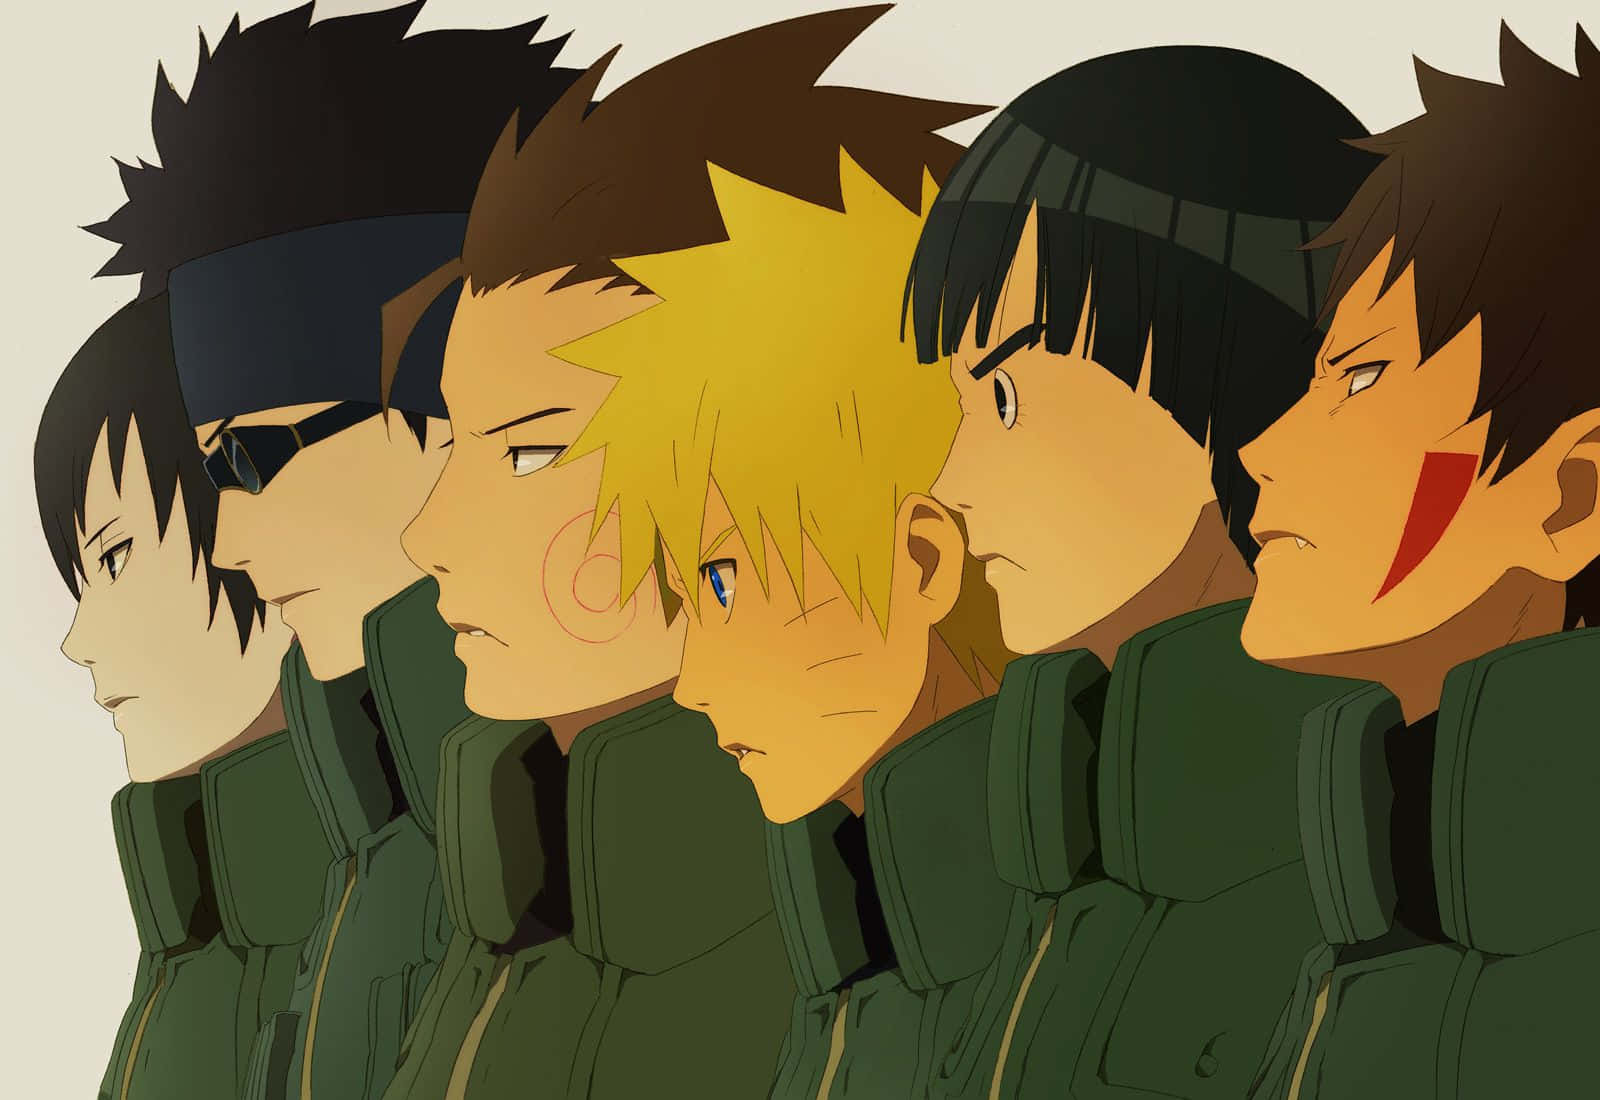 Naruto and his friends sharing a moment together Wallpaper